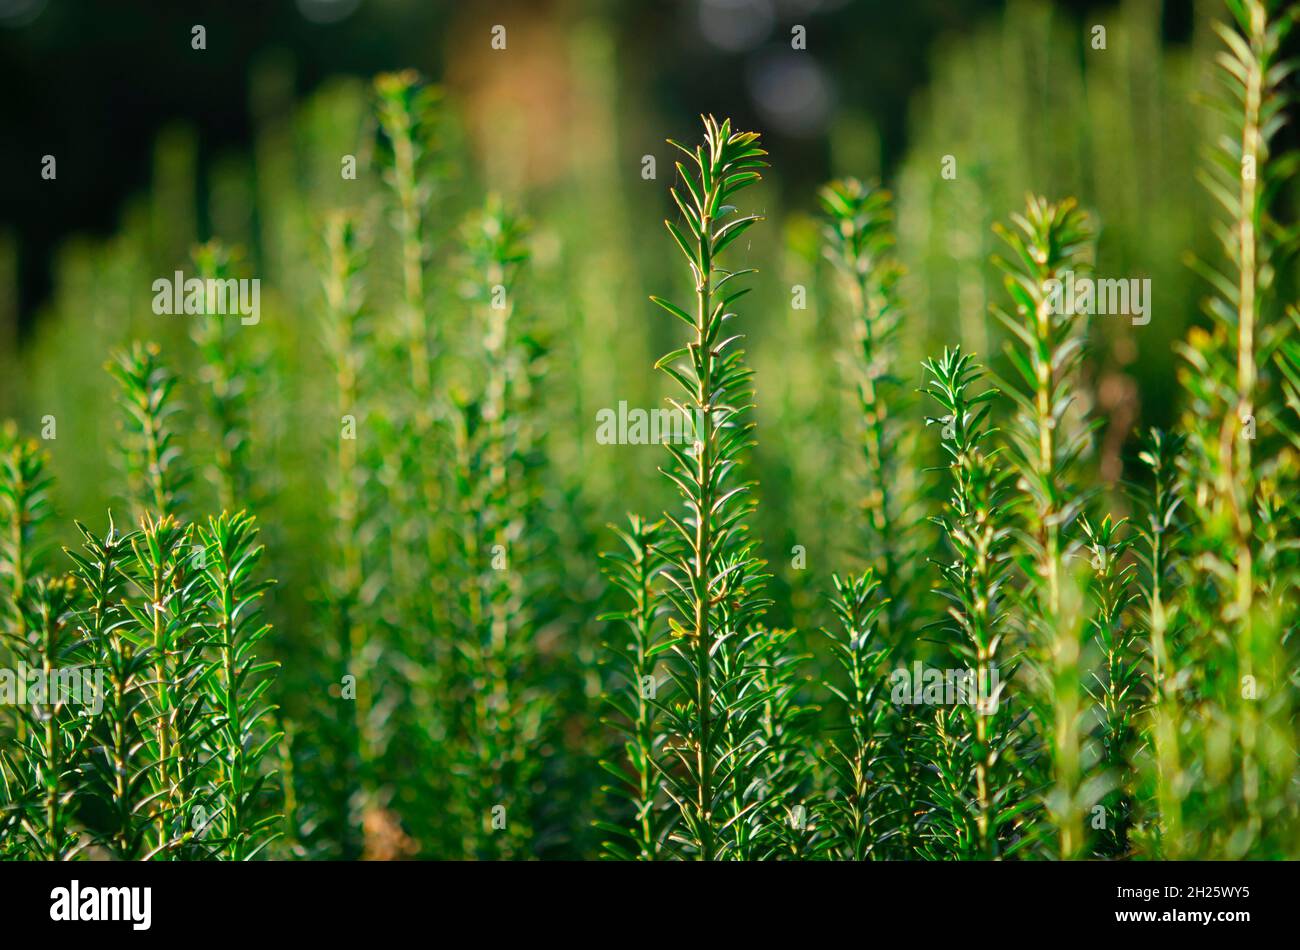 Vertical dark green with yellow stripes branches of yew Taxus baccata Fastigiata Aurea as natural background Stock Photo